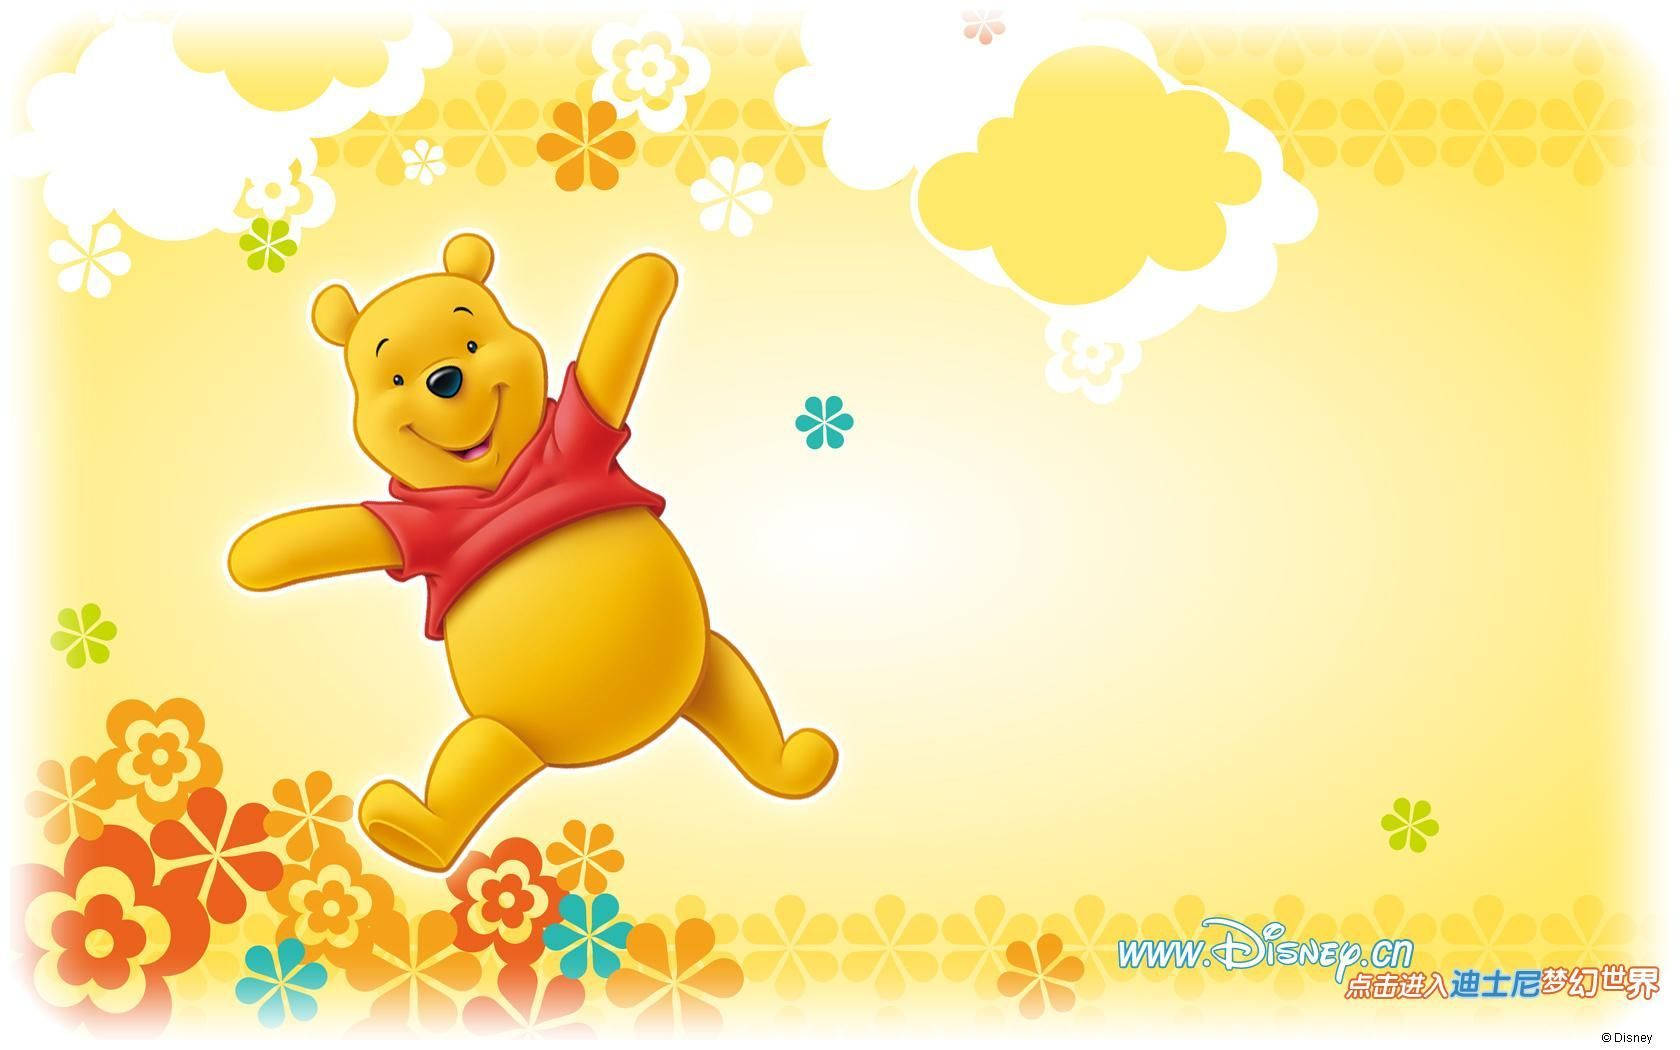 300+] Winnie The Pooh Wallpapers 